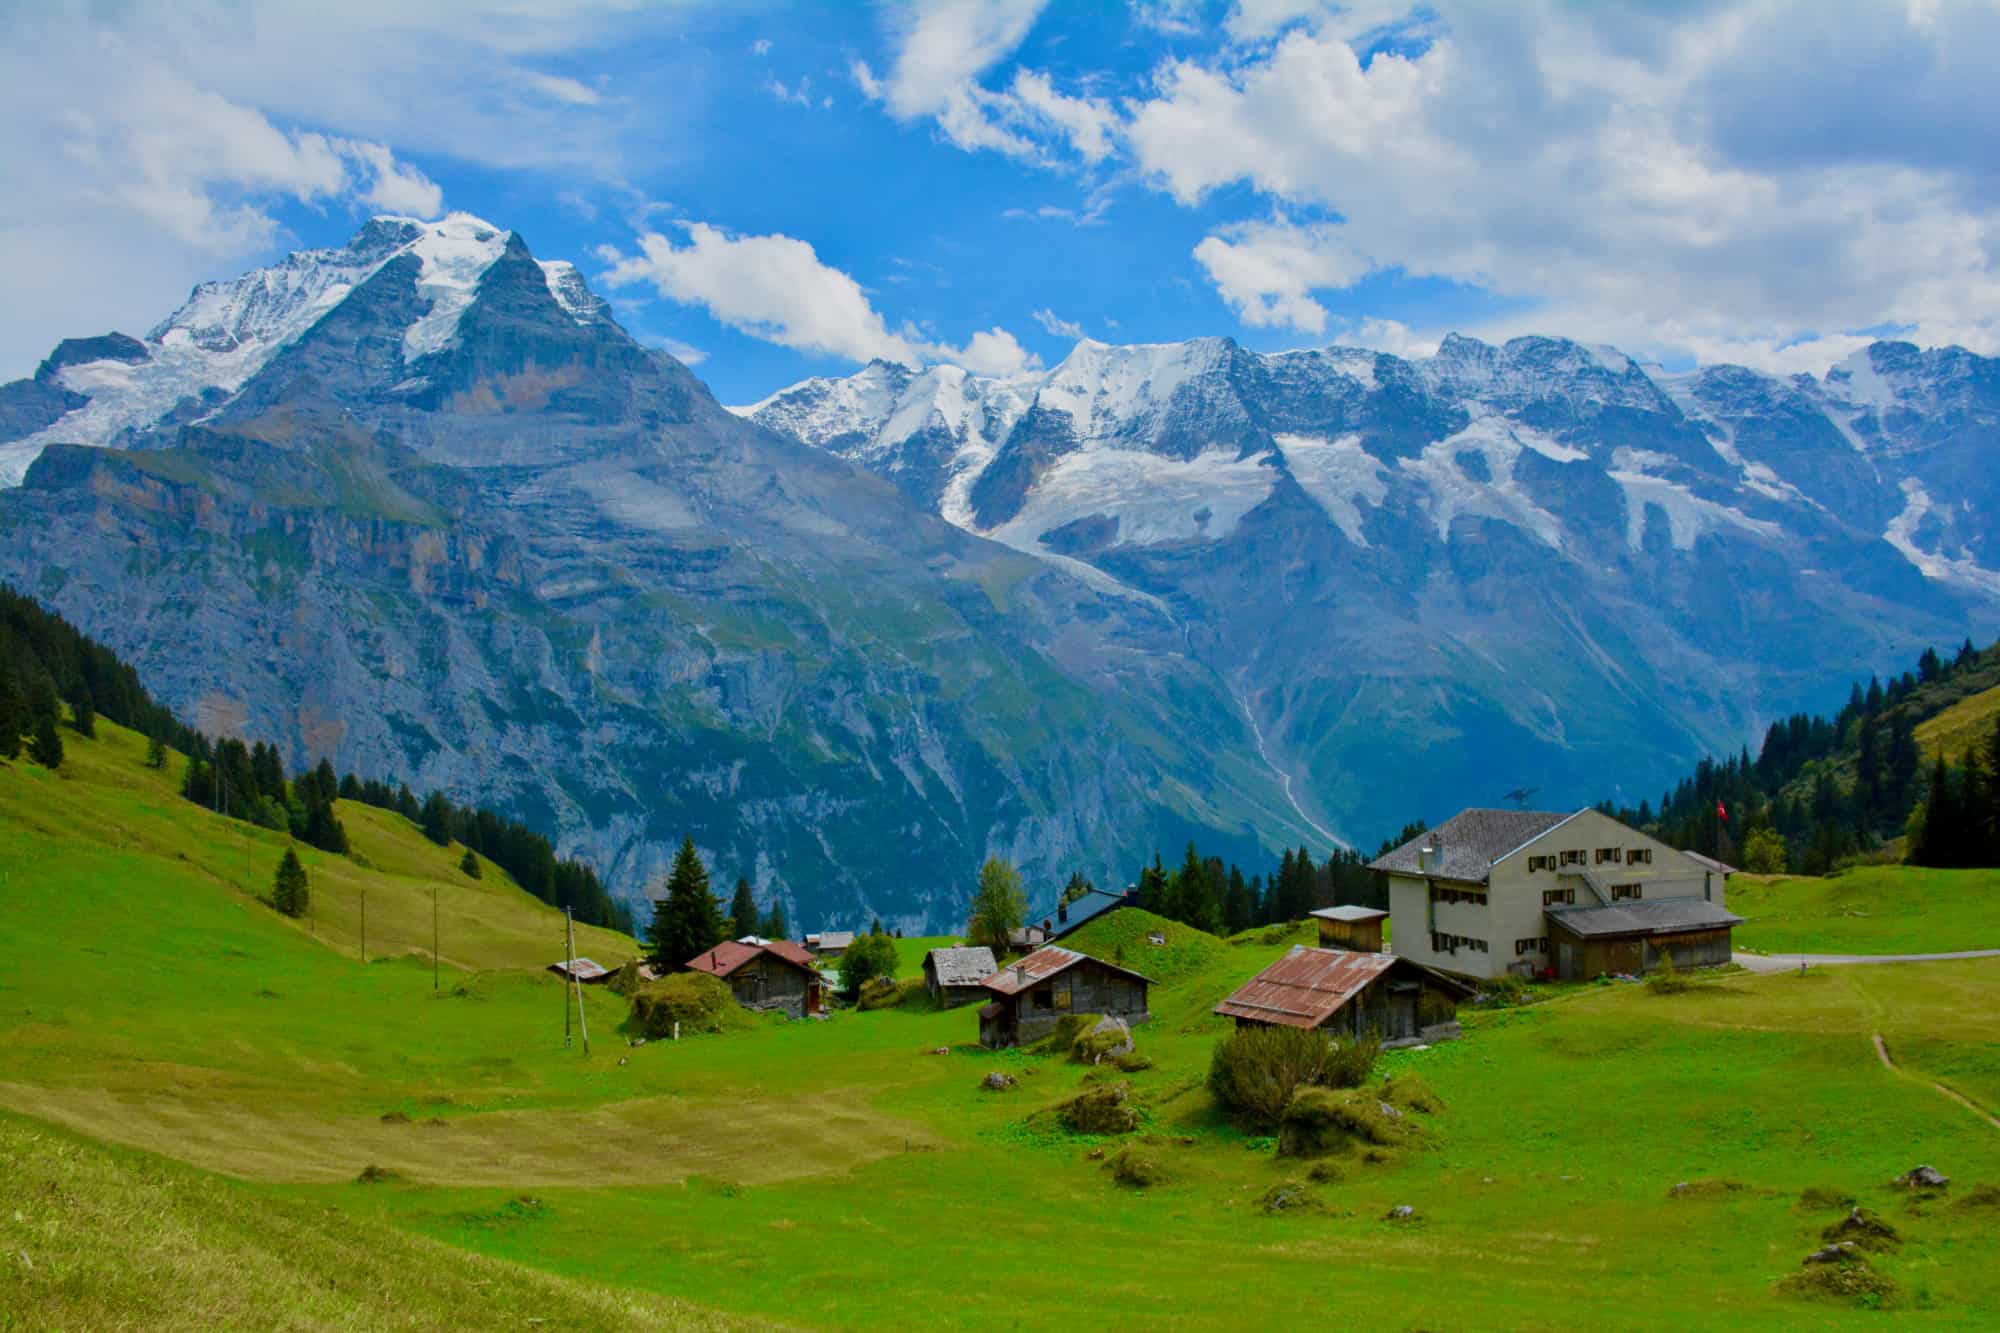 tips for travel to switzerland